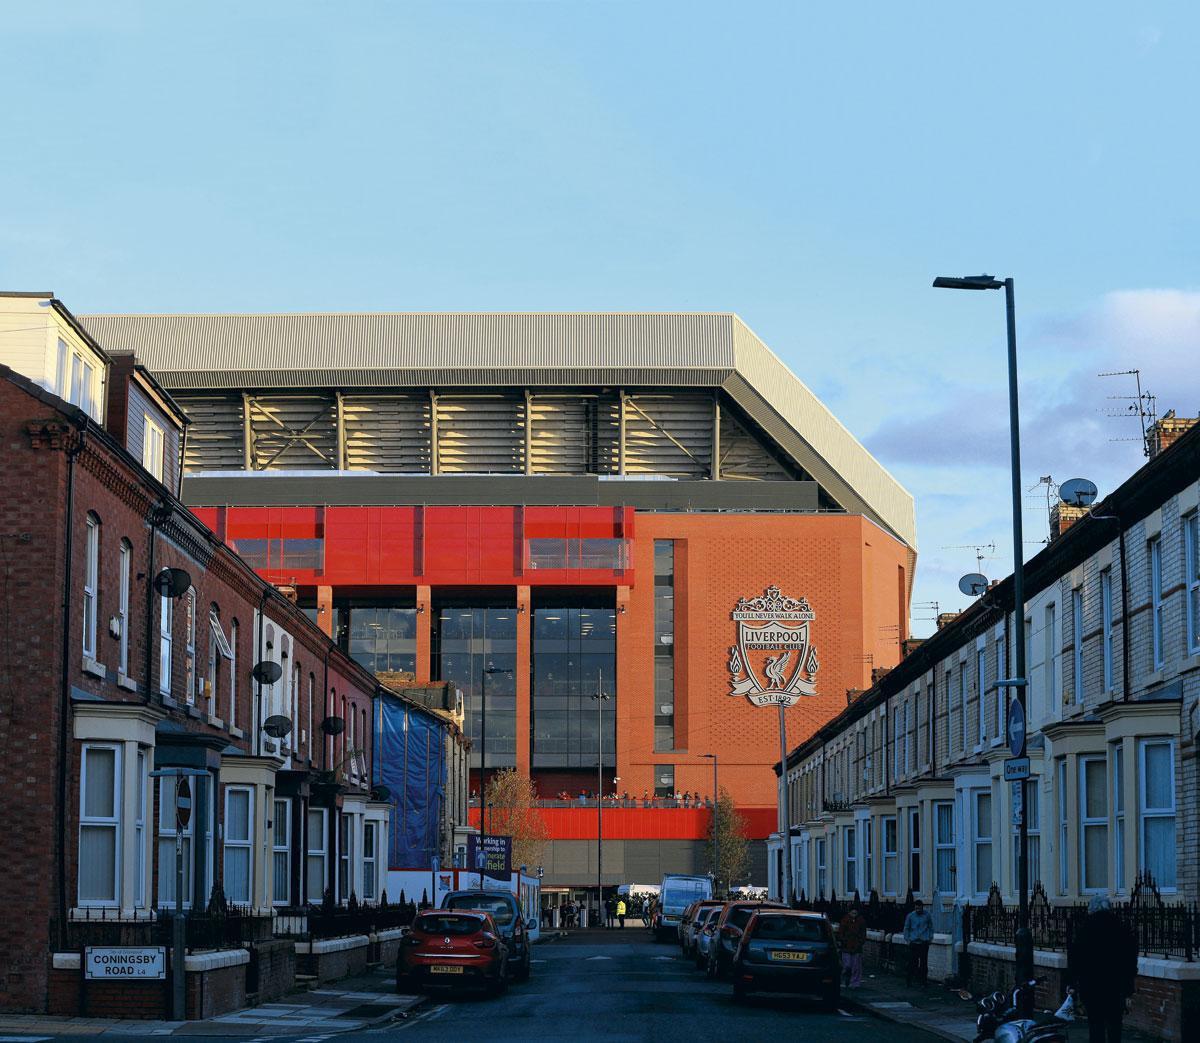 This is Anfield 